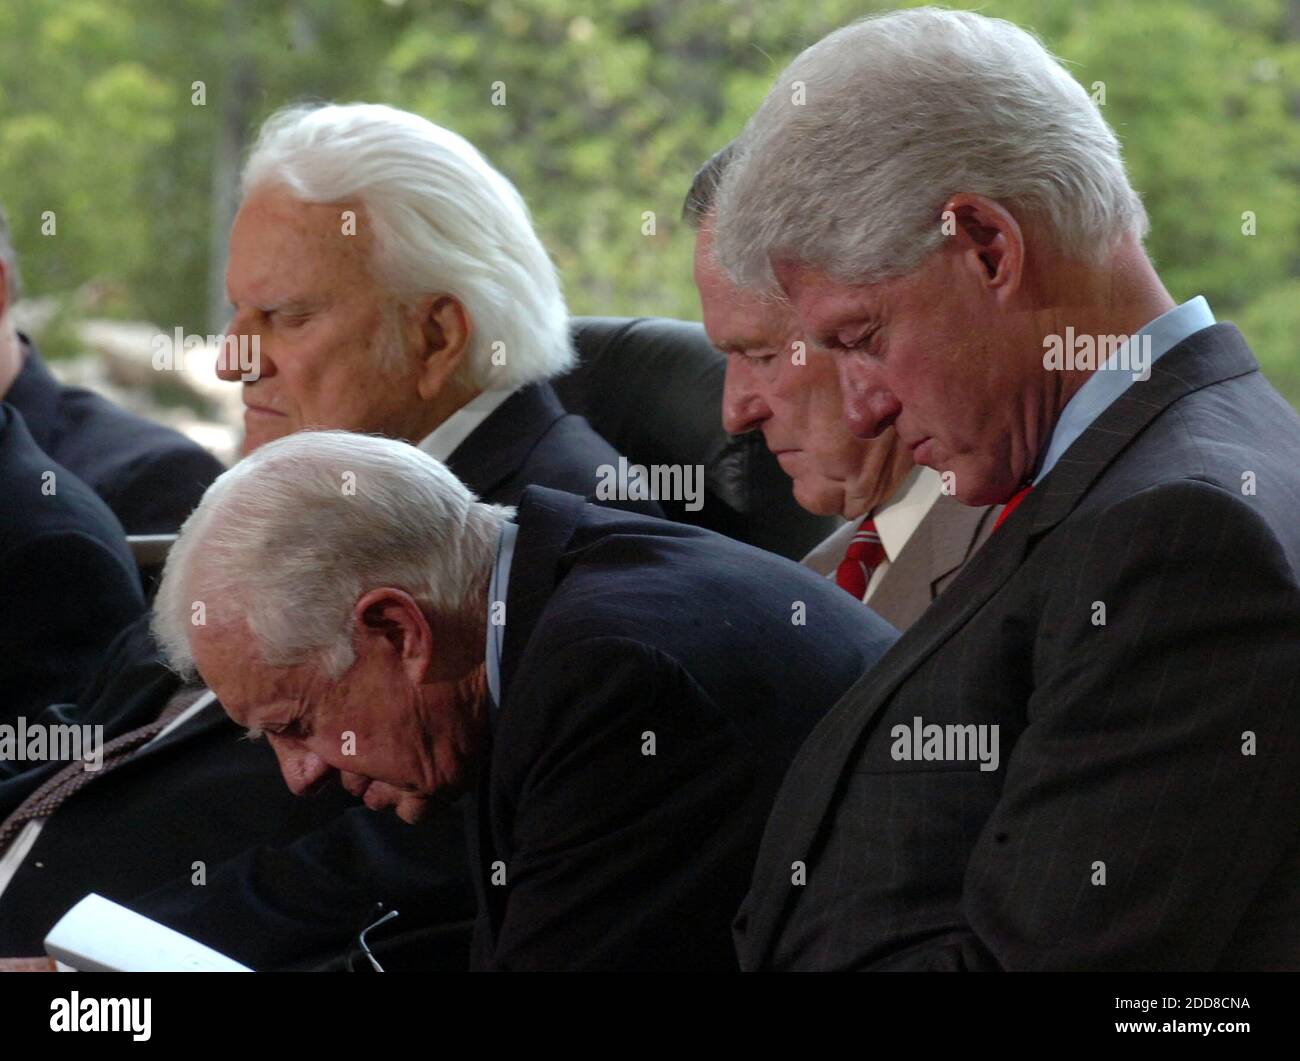 NO FILM, NO VIDEO, NO TV, NO DOCUMENTARY - File picture dated May 30, 2007 in Charlotte, North Carolina, USA of Evangelist Billy Graham (background) with former Presidents (L-R) Jimmy Carter, George H.W. Bush and Bill Clinton bowing their heads in prayer at the dedication of The Billy Graham Library. The founder of the Billy Graham Evangelical Association will celebrate his 9Oth birthday November 7. Photo by Todd Sumlin/Charlotte Observer/MCT/ABACAPRESS.COM Stock Photo